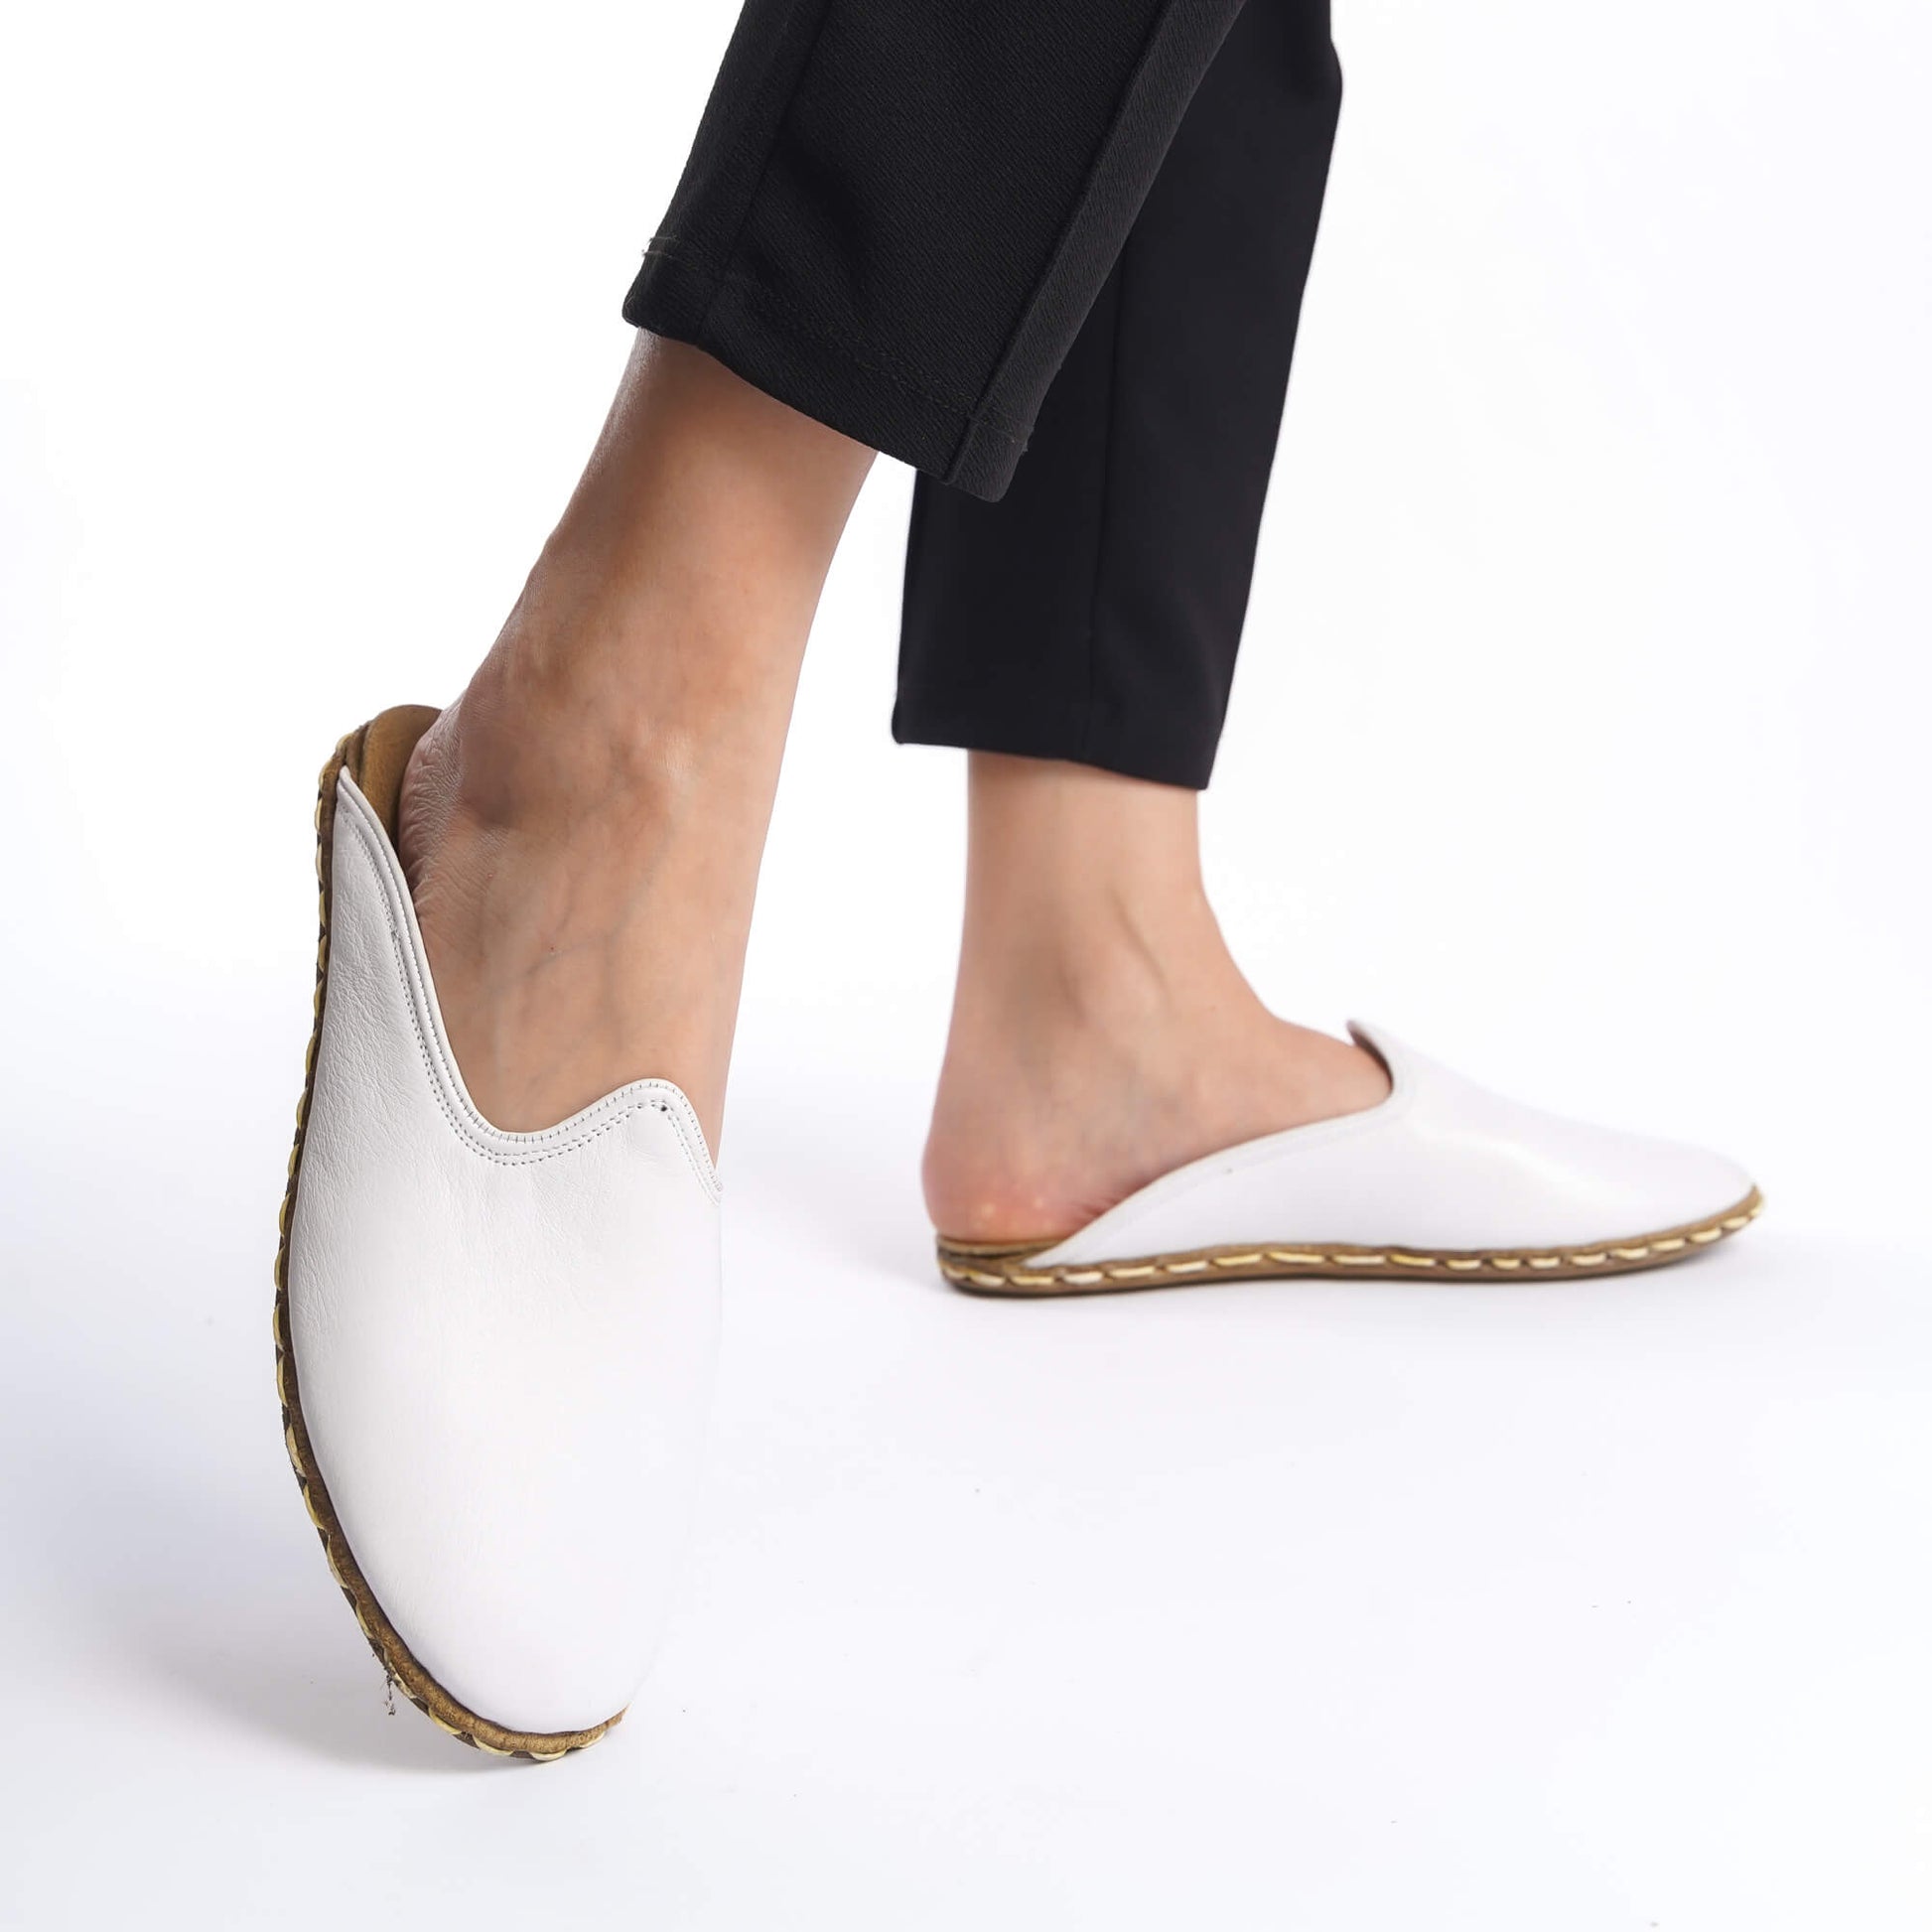 Women's Genuine Leather White Mules – Stitched Sole, Perfect for a Luxurious Summer